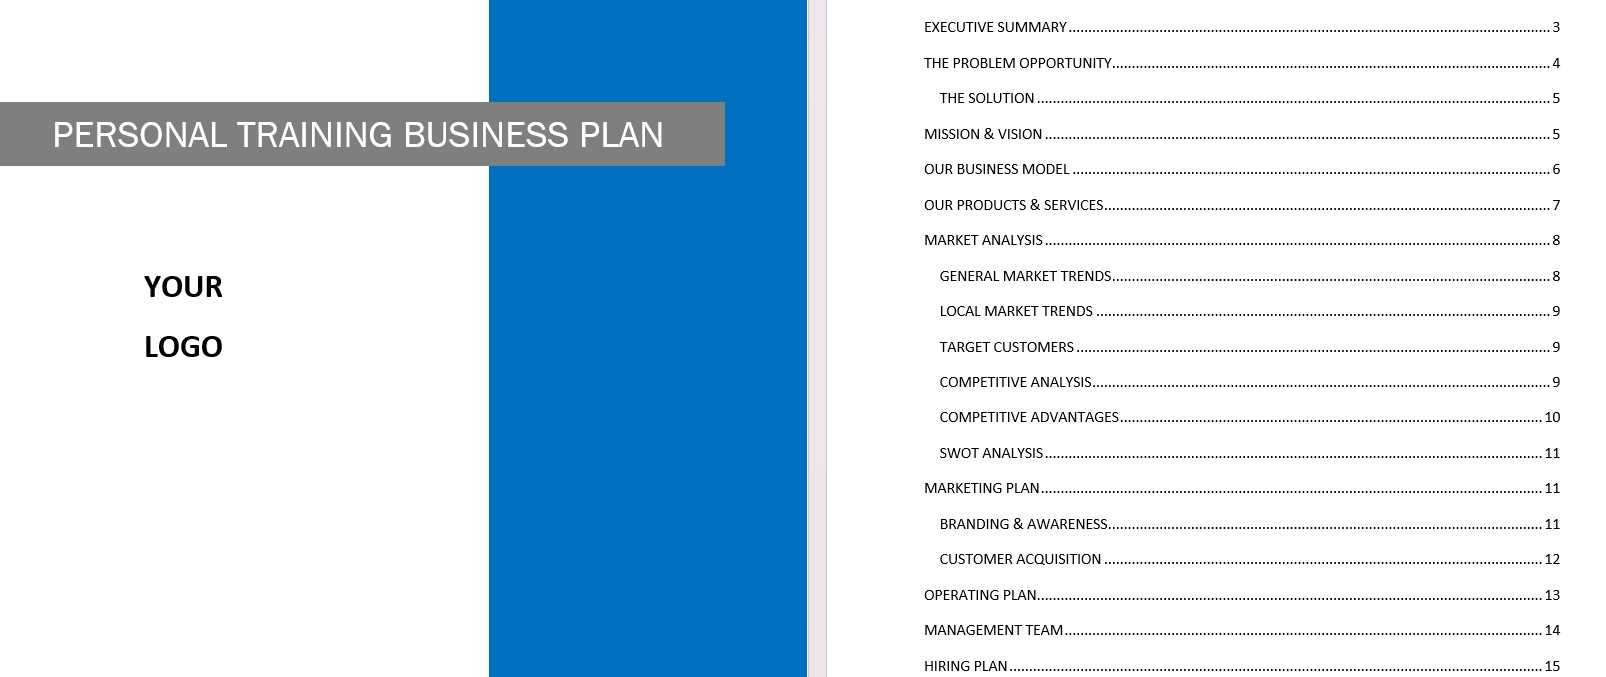 Personal training business plan template in Word